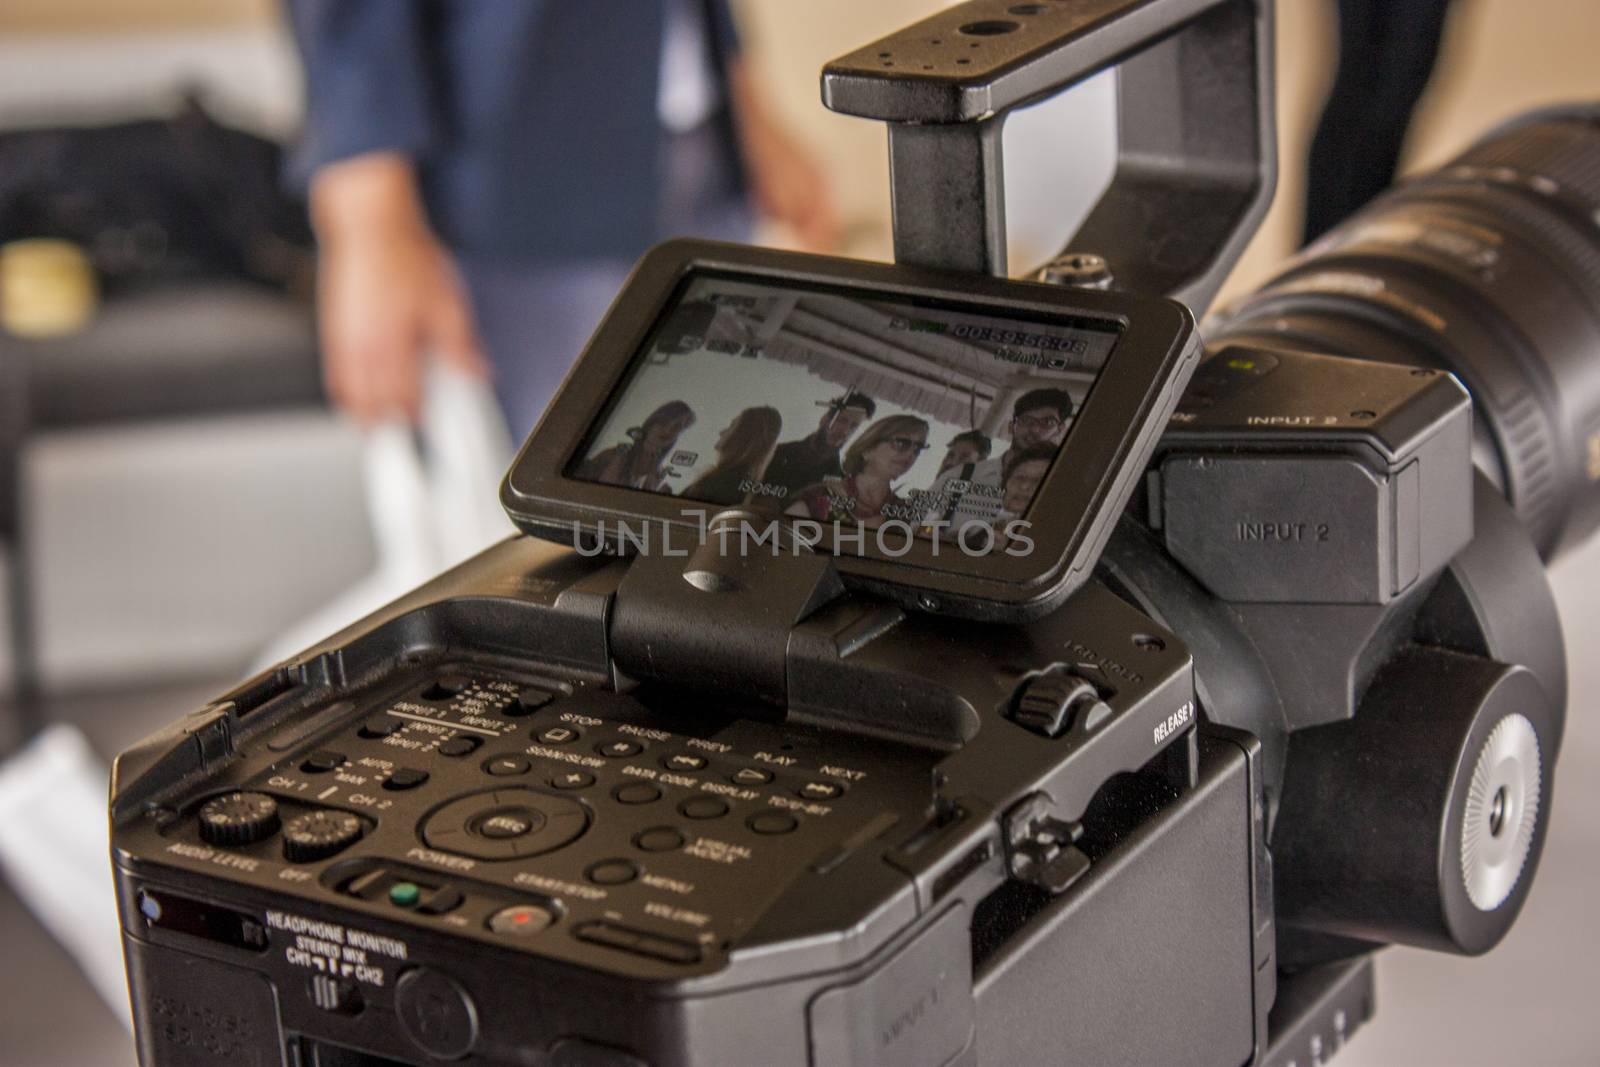 Backstage photos to a detail of a digital camera while he is filming a movie scene.